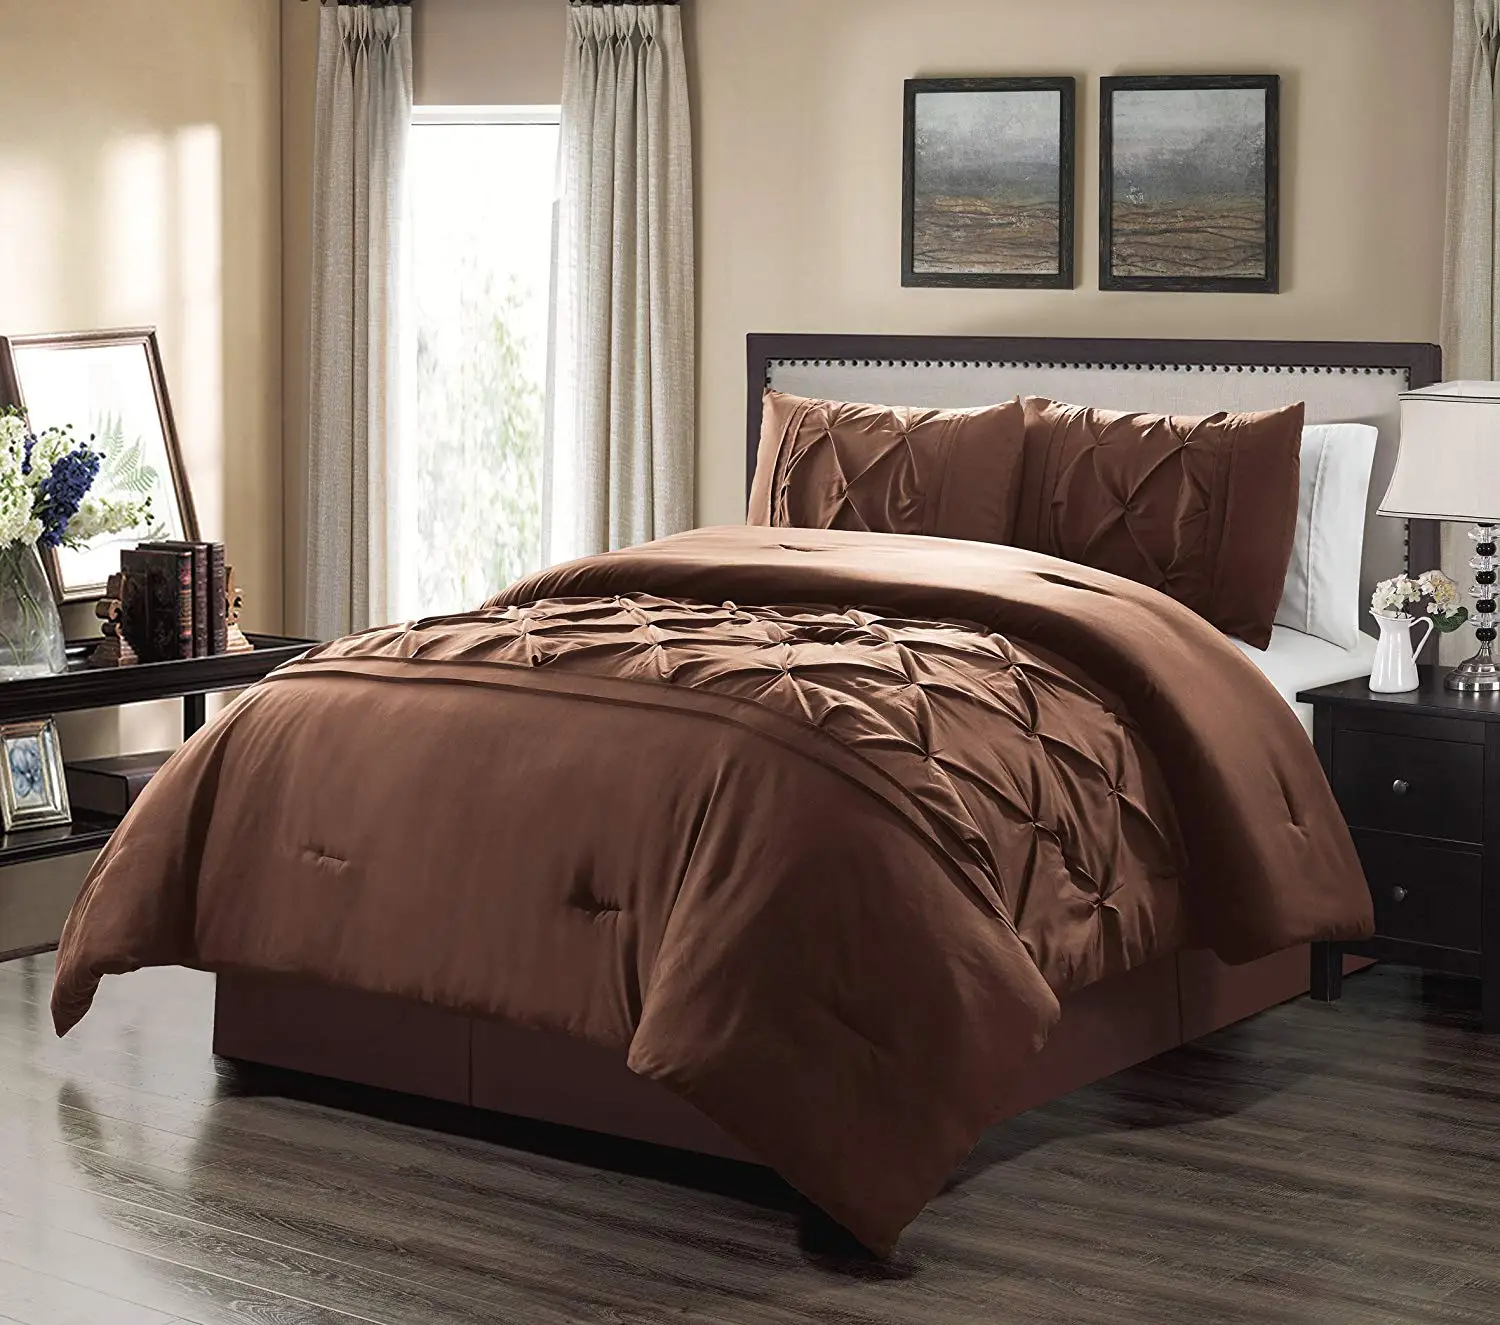 Cheap Brown King Size Comforter Find Brown King Size Comforter Deals On Line At Alibaba Com